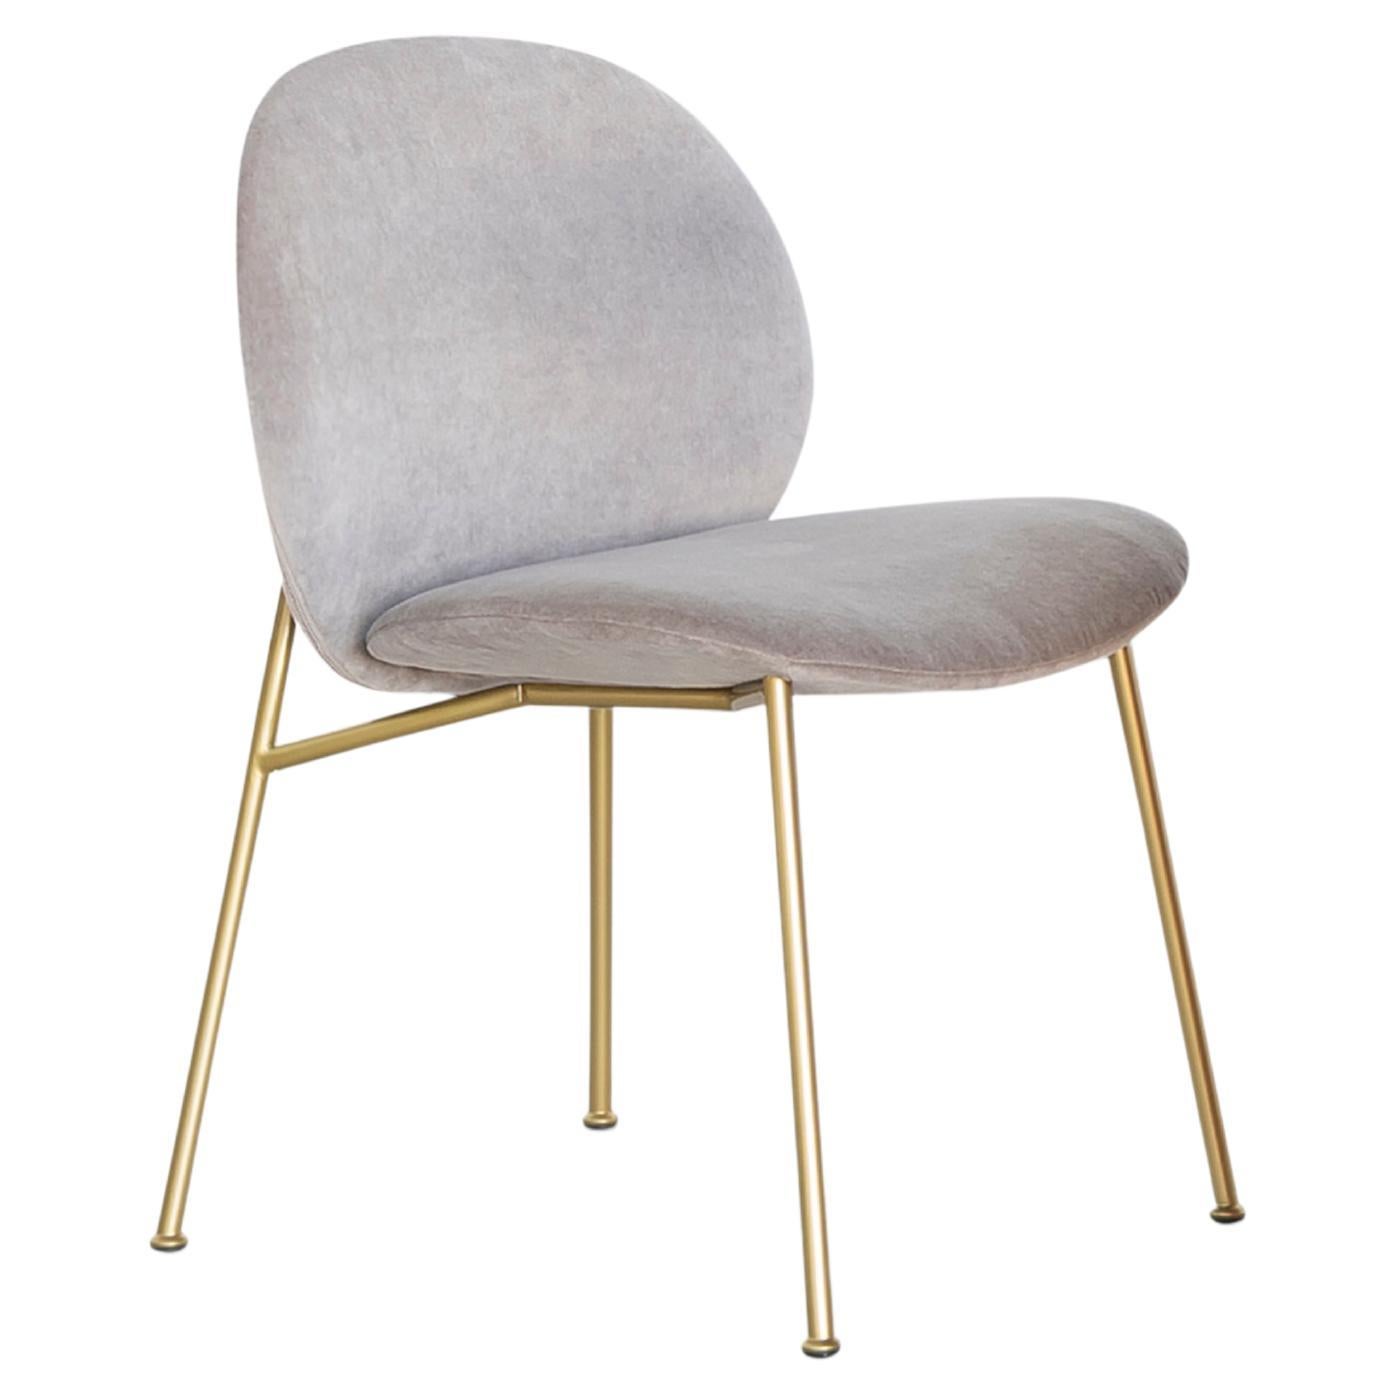 Ola Chair in Violet 19 Beige Upholstery with Satin Brass Legs by Saba For Sale